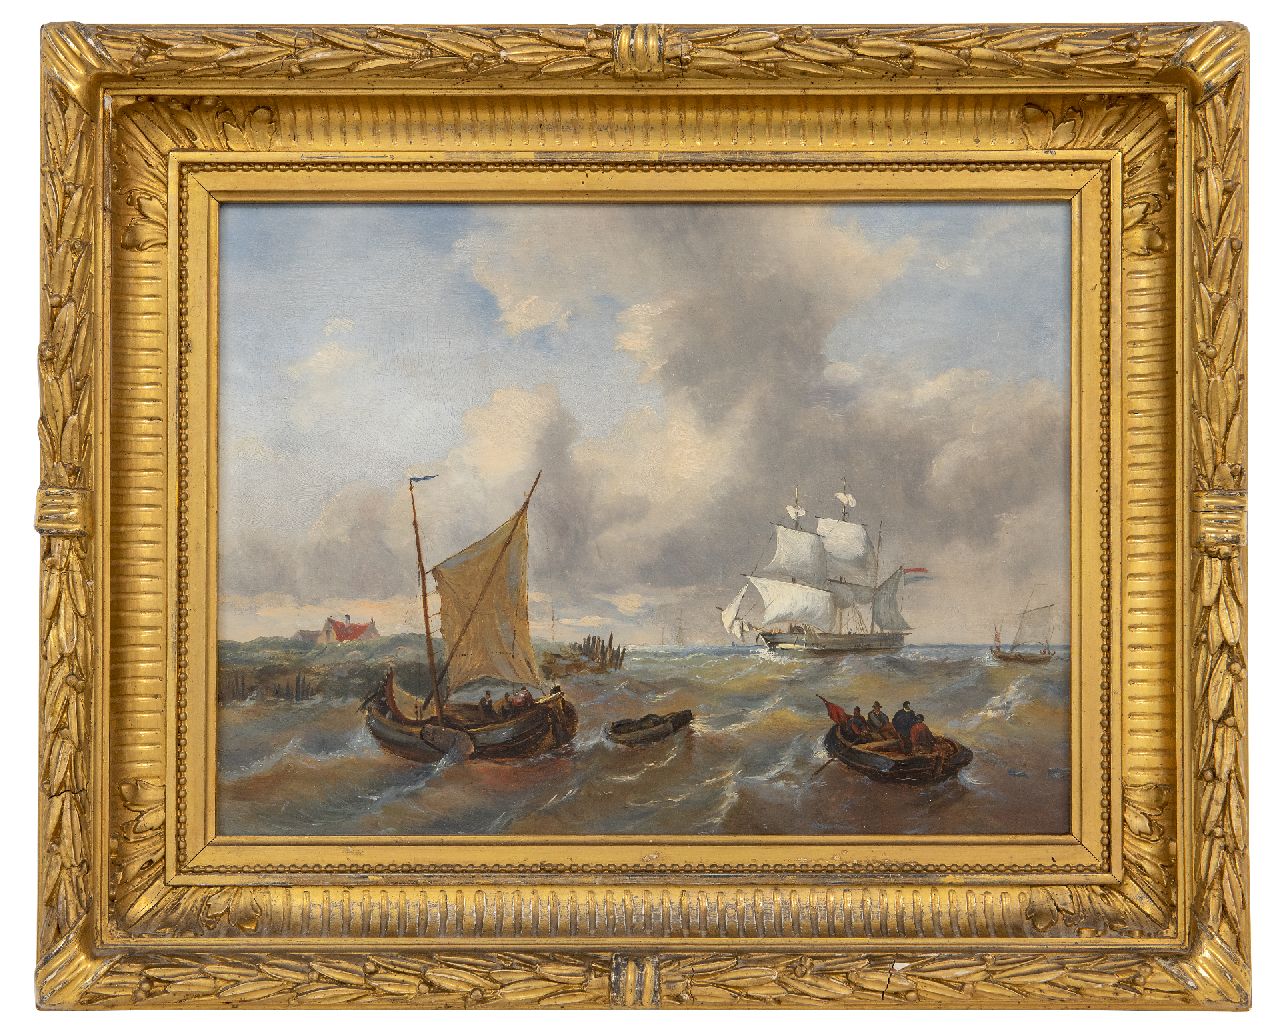 Opdenhoff (toegeschreven aan) G.W.  | Witzel 'George Willem' Opdenhoff (toegeschreven aan) | Paintings offered for sale | Sailing vessels off the coast in rough weather, oil on panel 23.7 x 32.0 cm